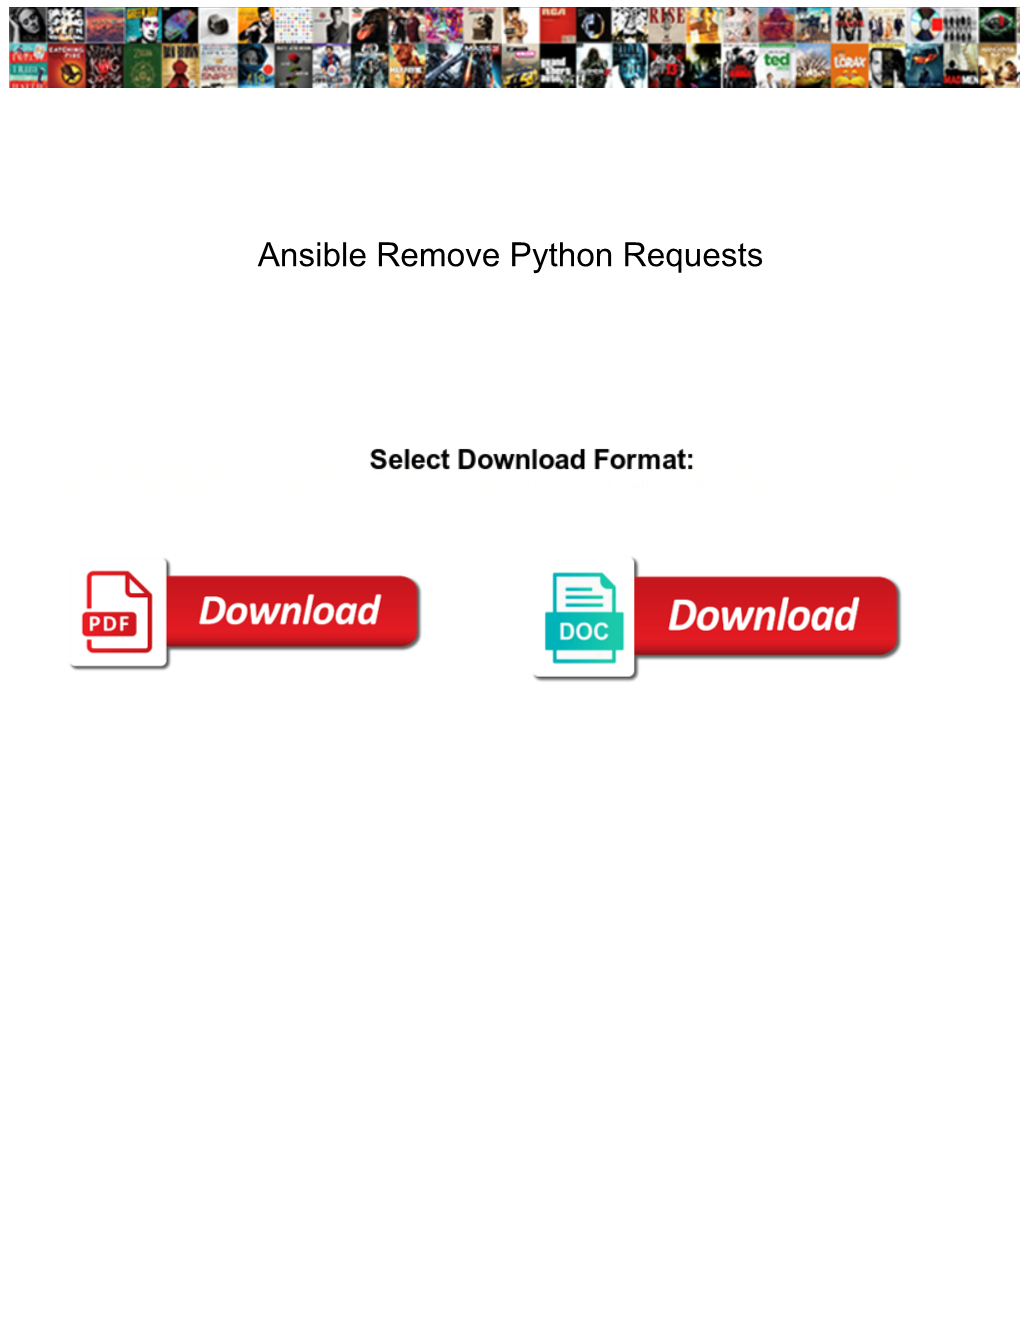 Ansible Remove Python Requests